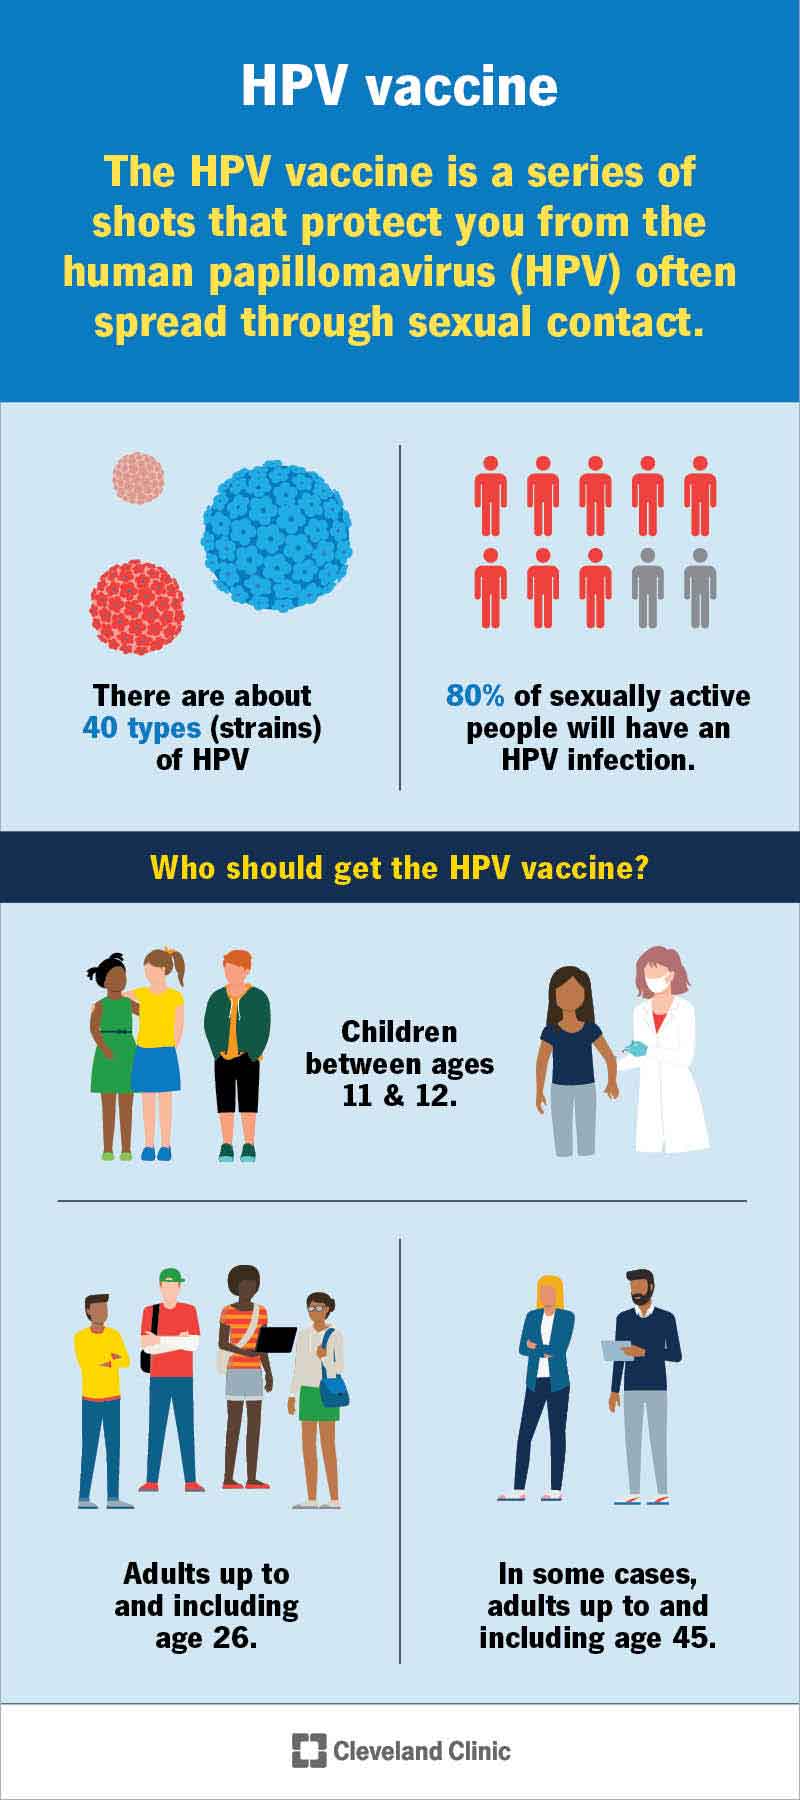 Statistics on the prevalence of HPV and the recommended ages for vaccination.